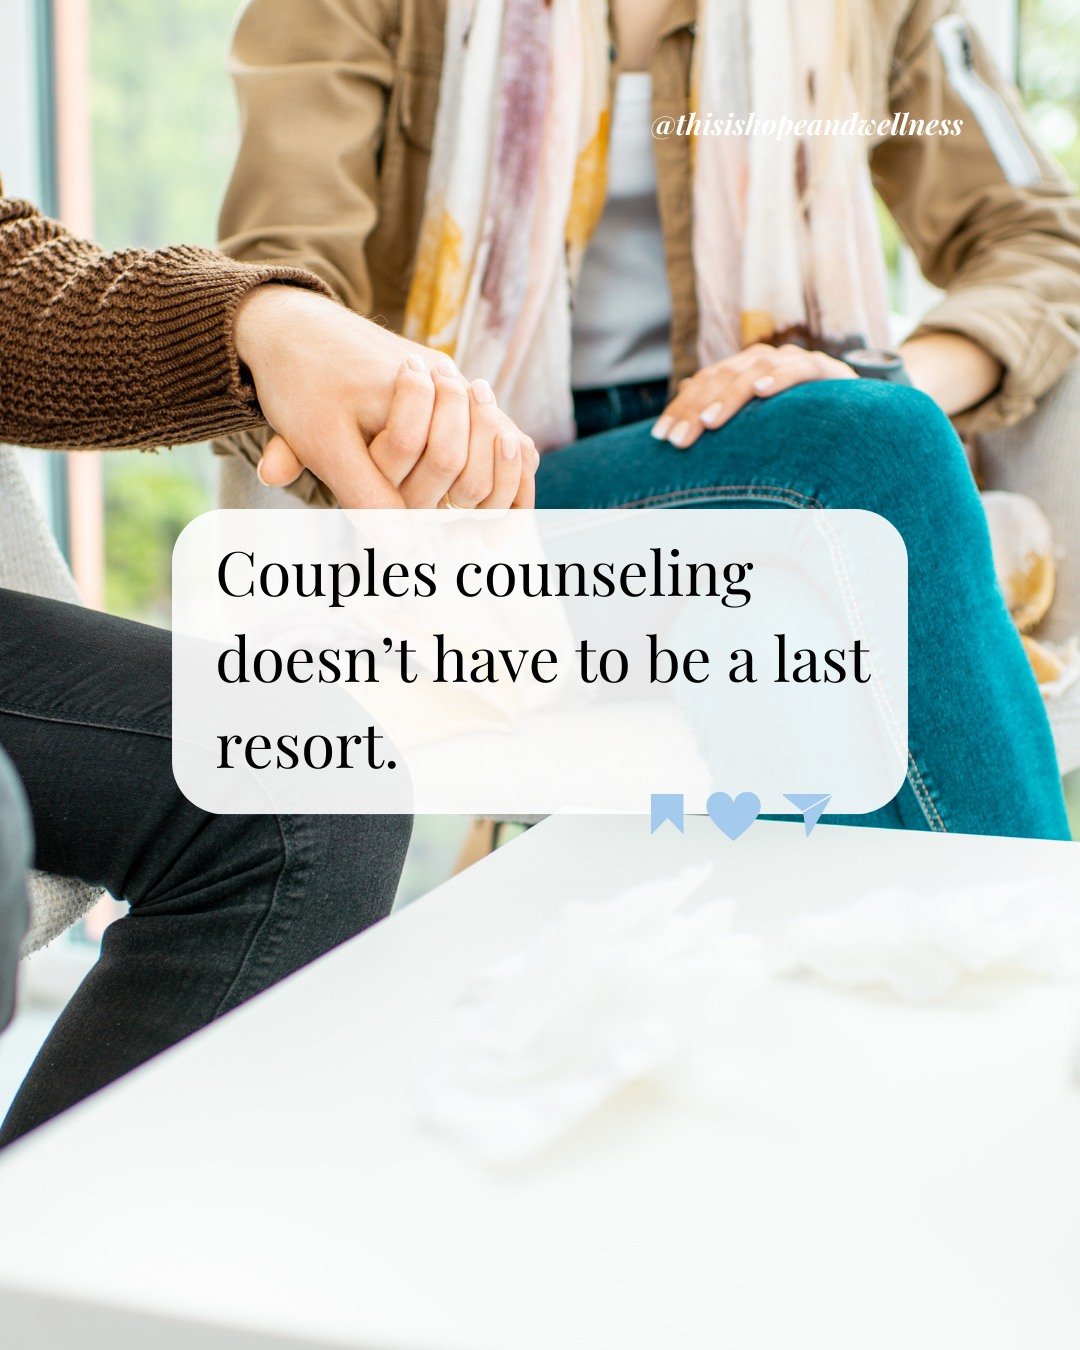 You don&rsquo;t even have to be going through something serious to start couples counseling. It can even be a good idea to start therapy before you have major issues, so that you have a solid foundation of communication skills and healthy conflict pa